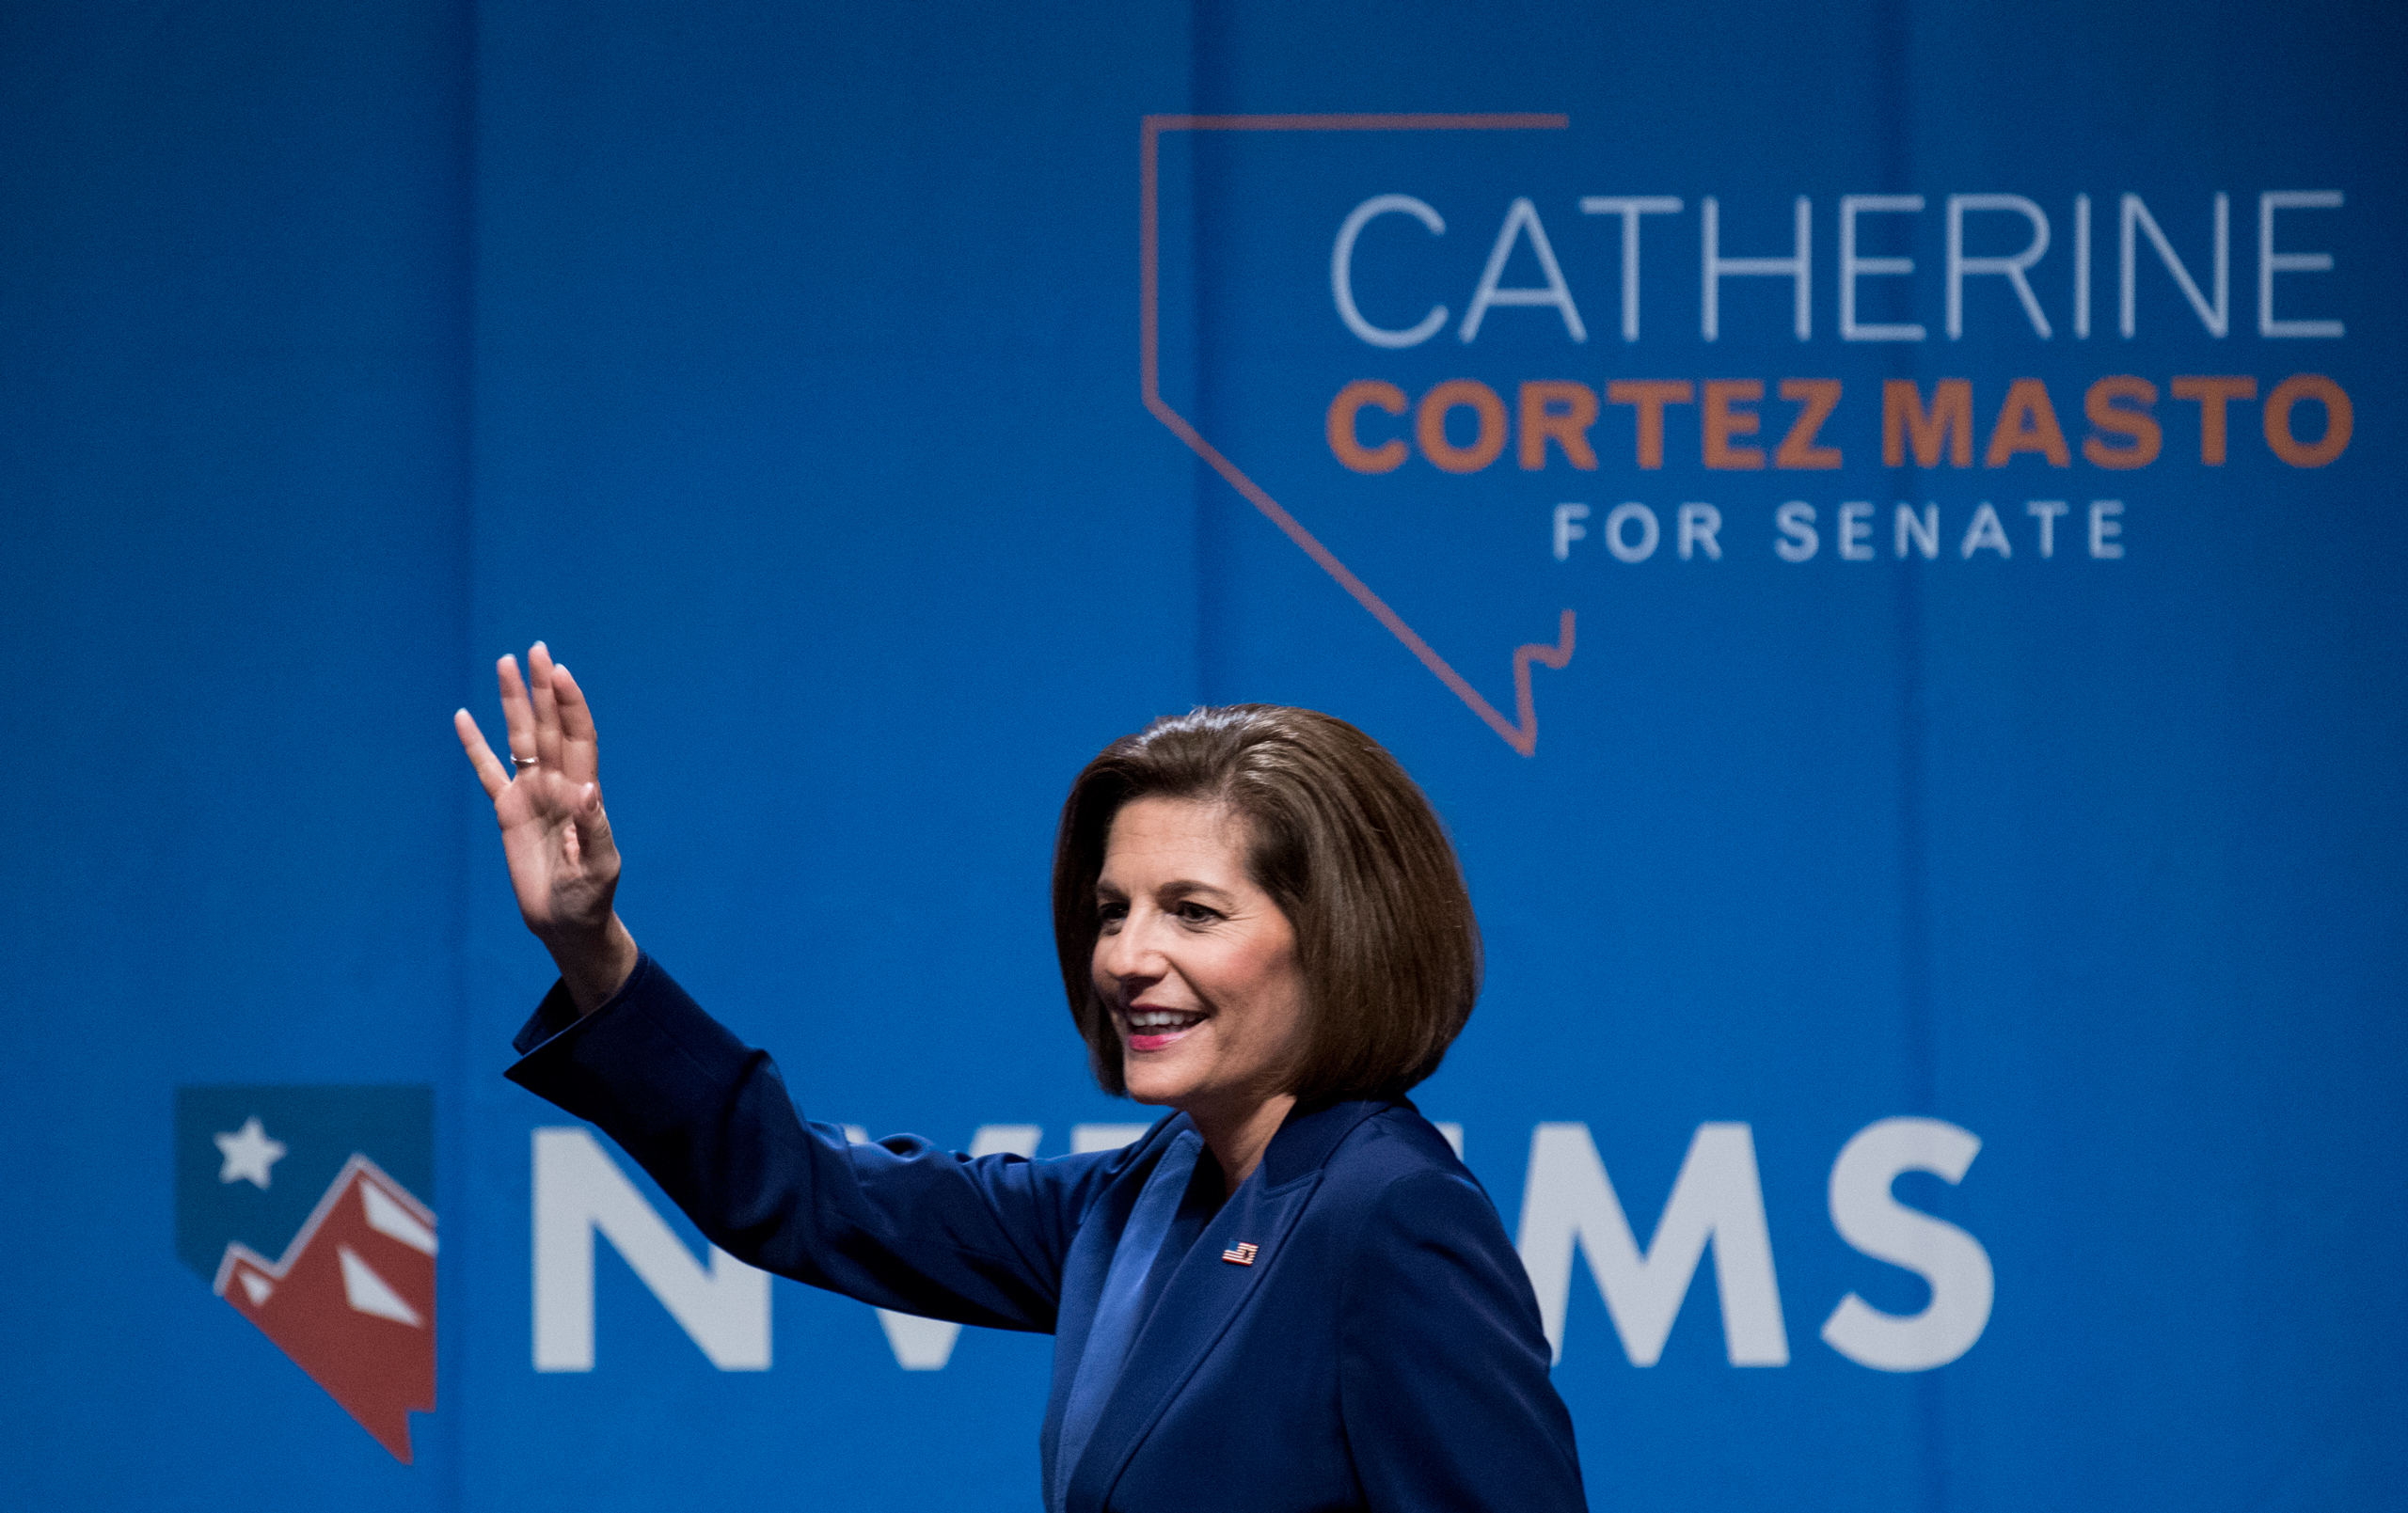 Catherine Cortez Masto, Democratic candidate for U.S. Senate from Nevada, delivers her victory speech at the Nevada Democrats' election night watch party at the Aria Hotel &amp; Resort in Las Vegas  on Nov. 8, 2016. (Bill Clark—AP)